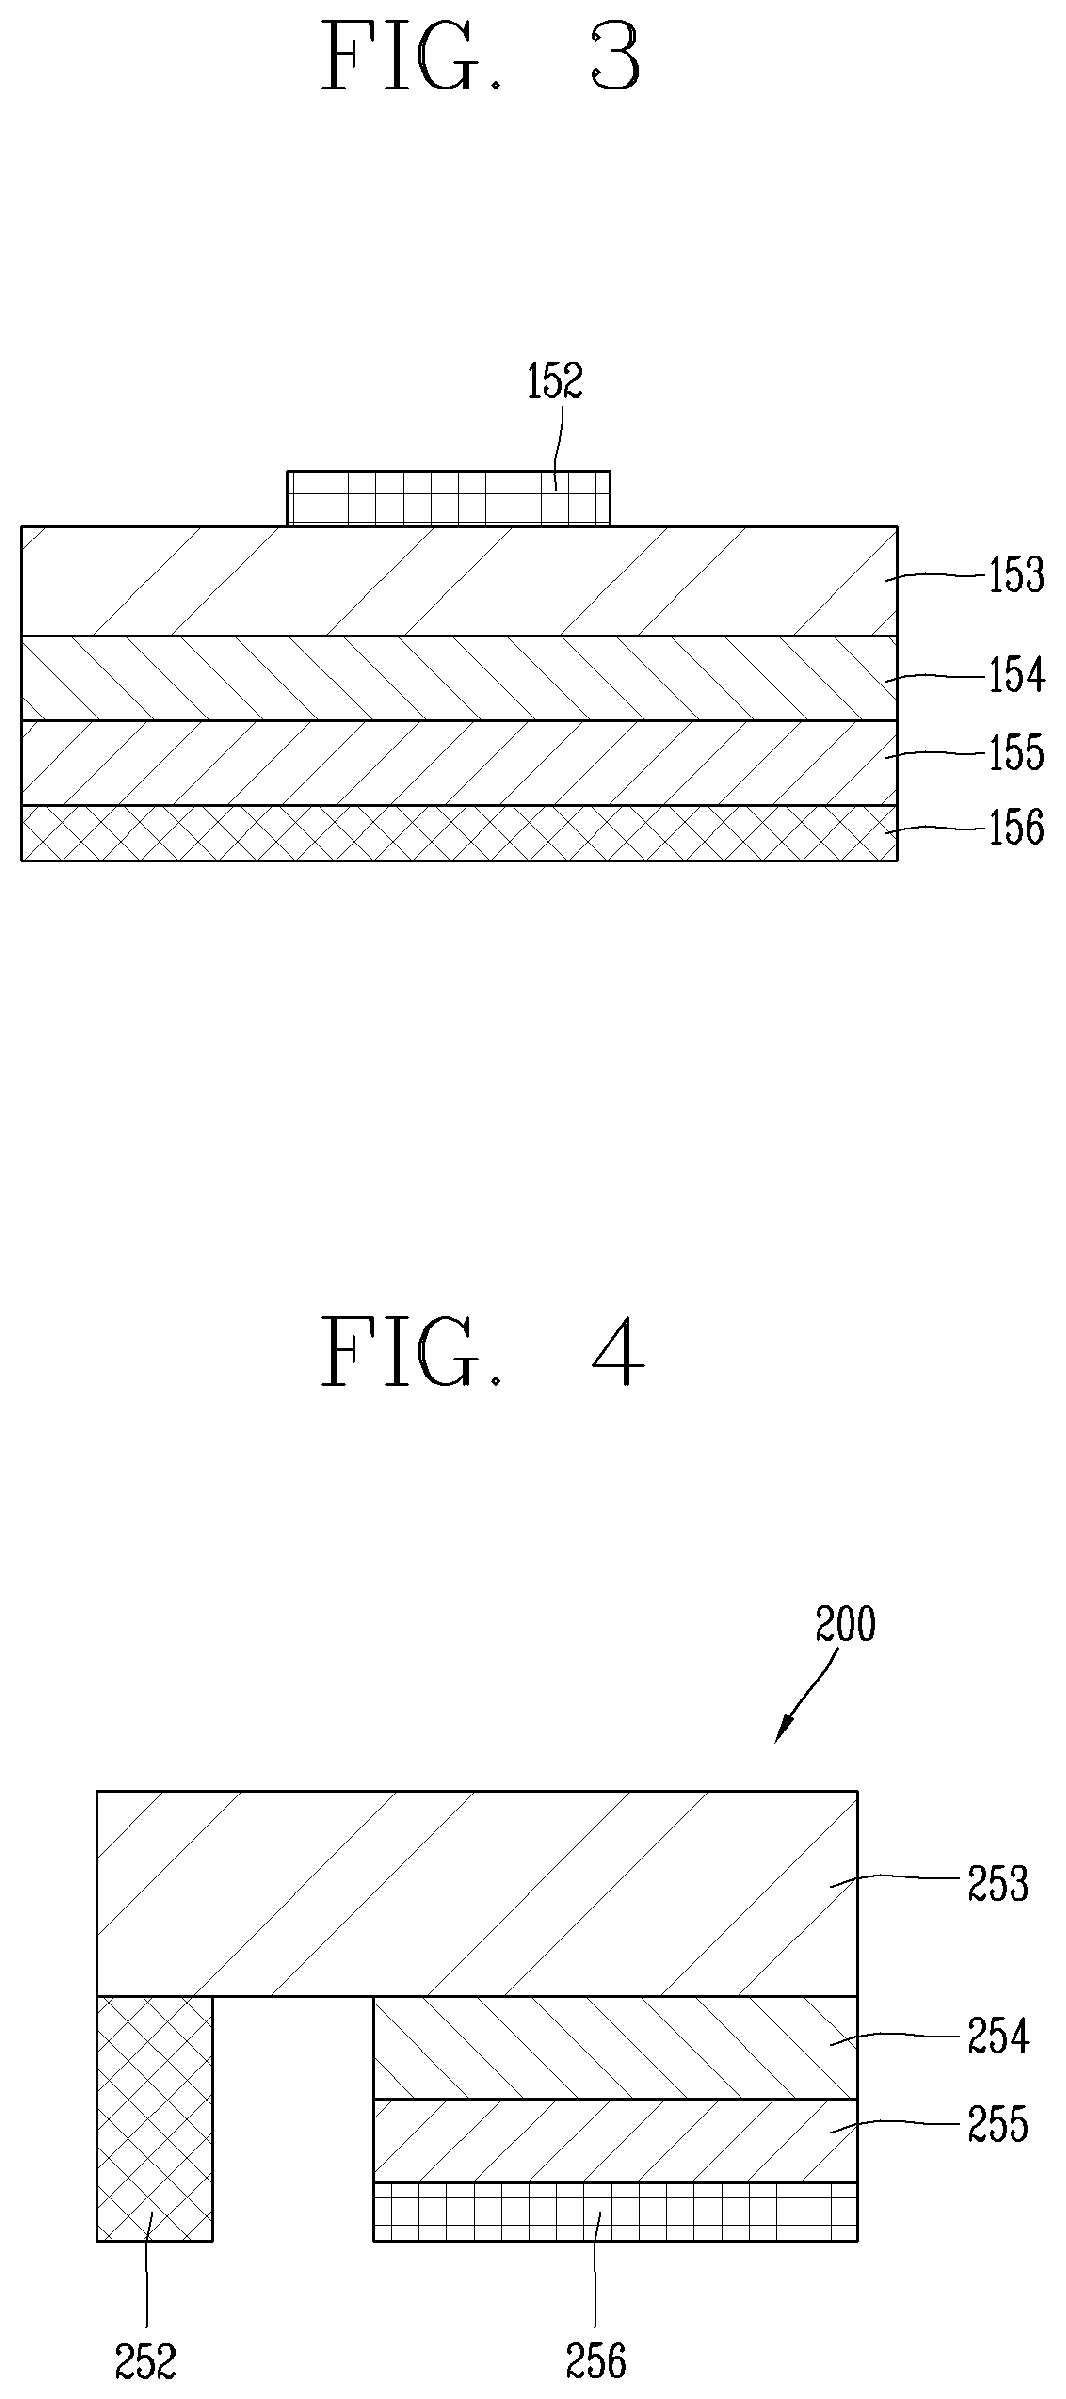 Self-assembly apparatus and method for semiconductor light emitting device